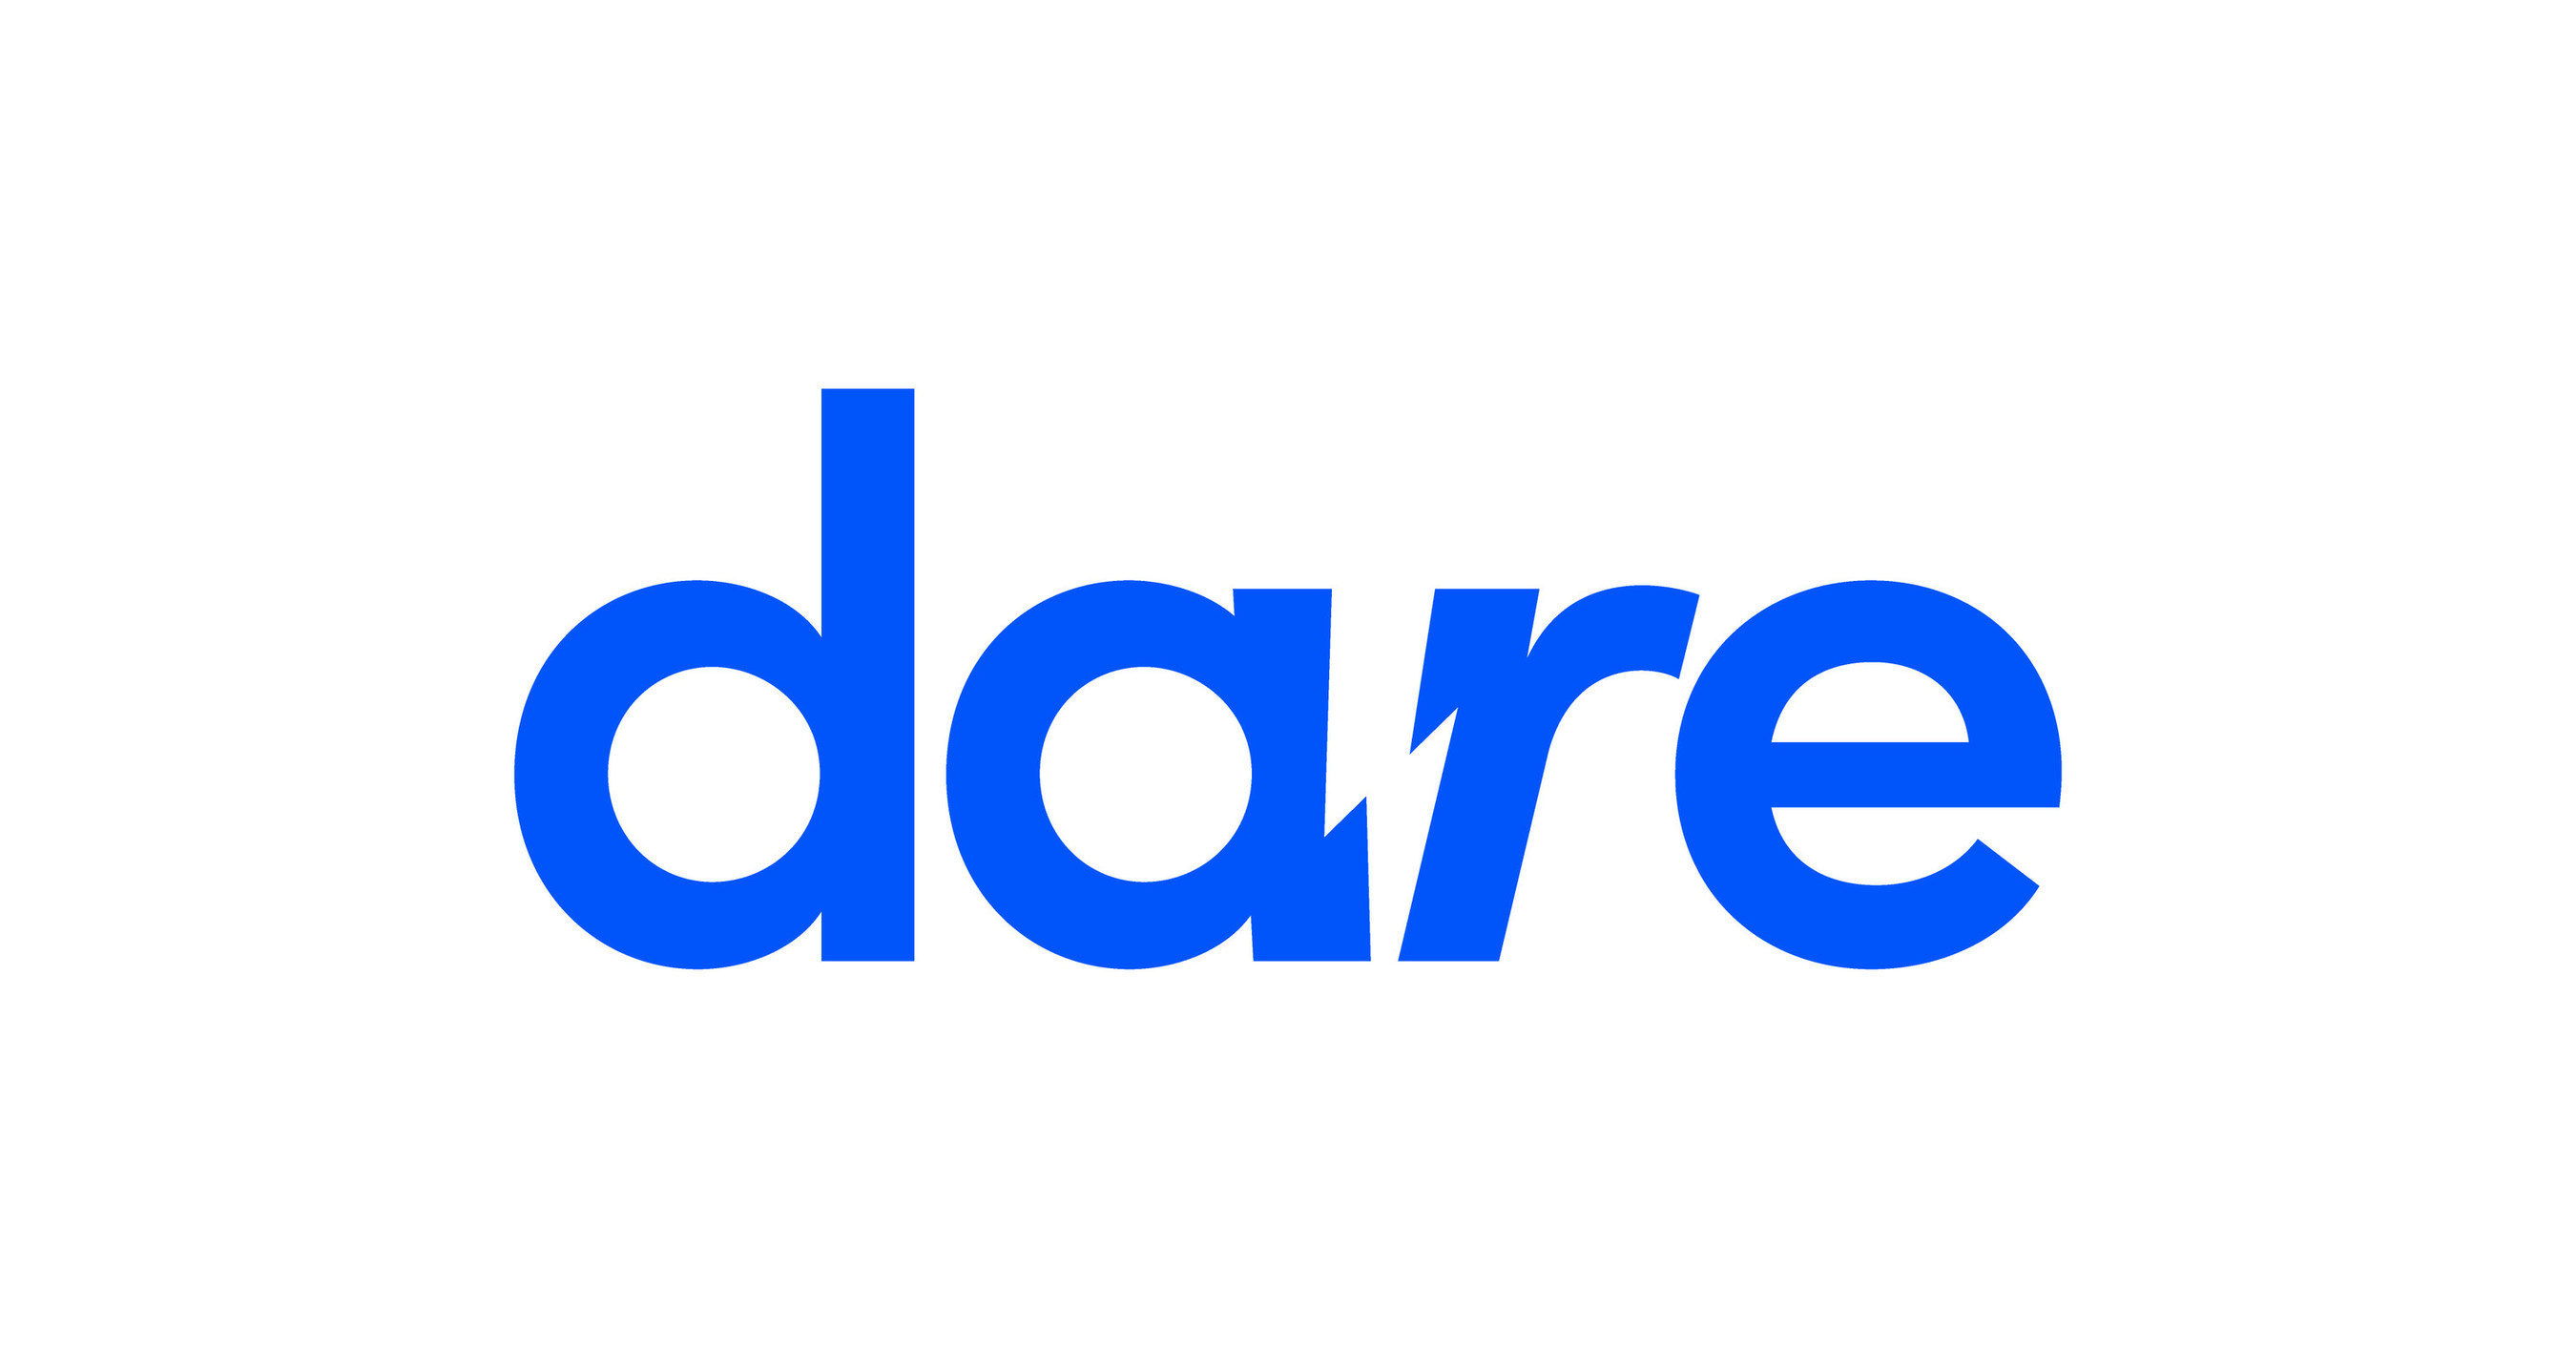 DARE APPOINTS CHIEF FINANCIAL OFFICER TO LEAD 'NEXT CHAPTER OF GROWTH ...